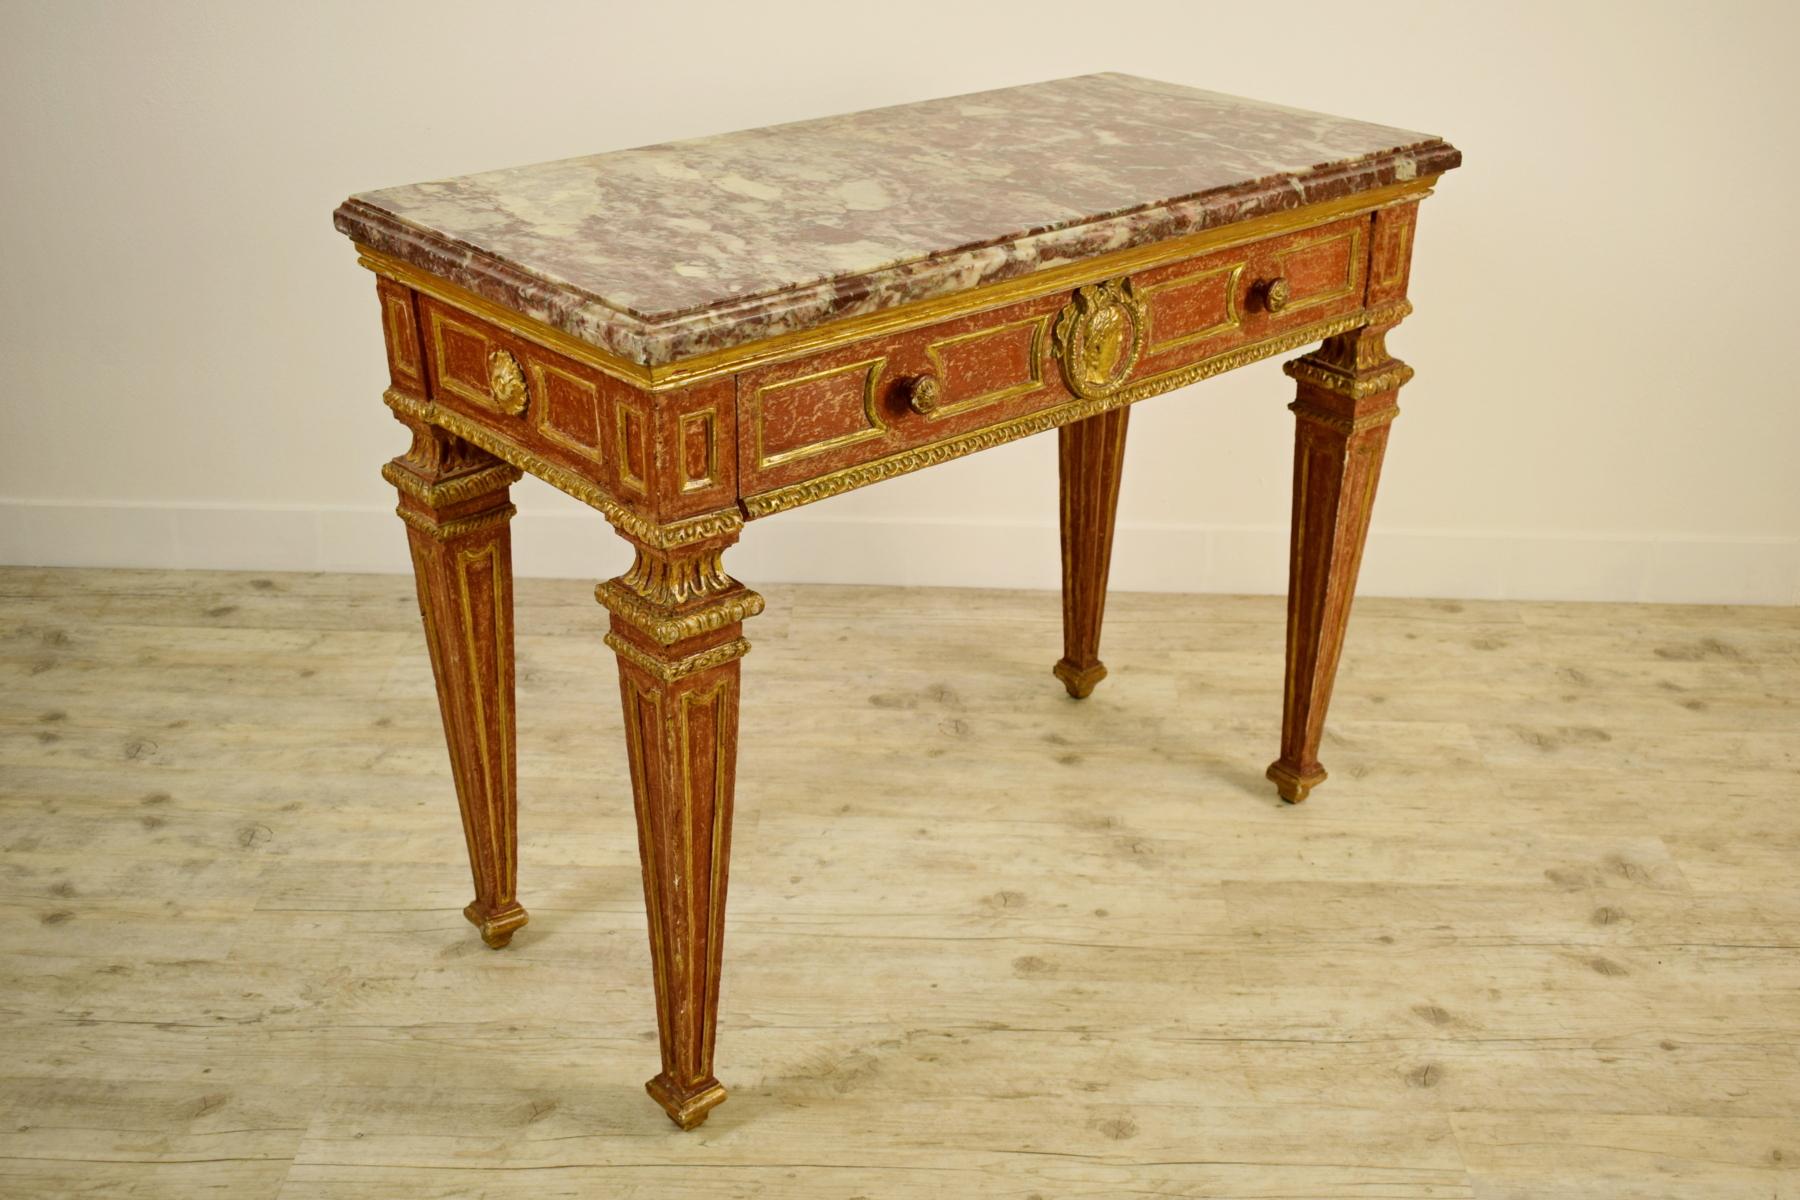 Hand-Carved 18th Century, Italian Neoclassical Gilded and Red Lacquered Wood with Marble Top